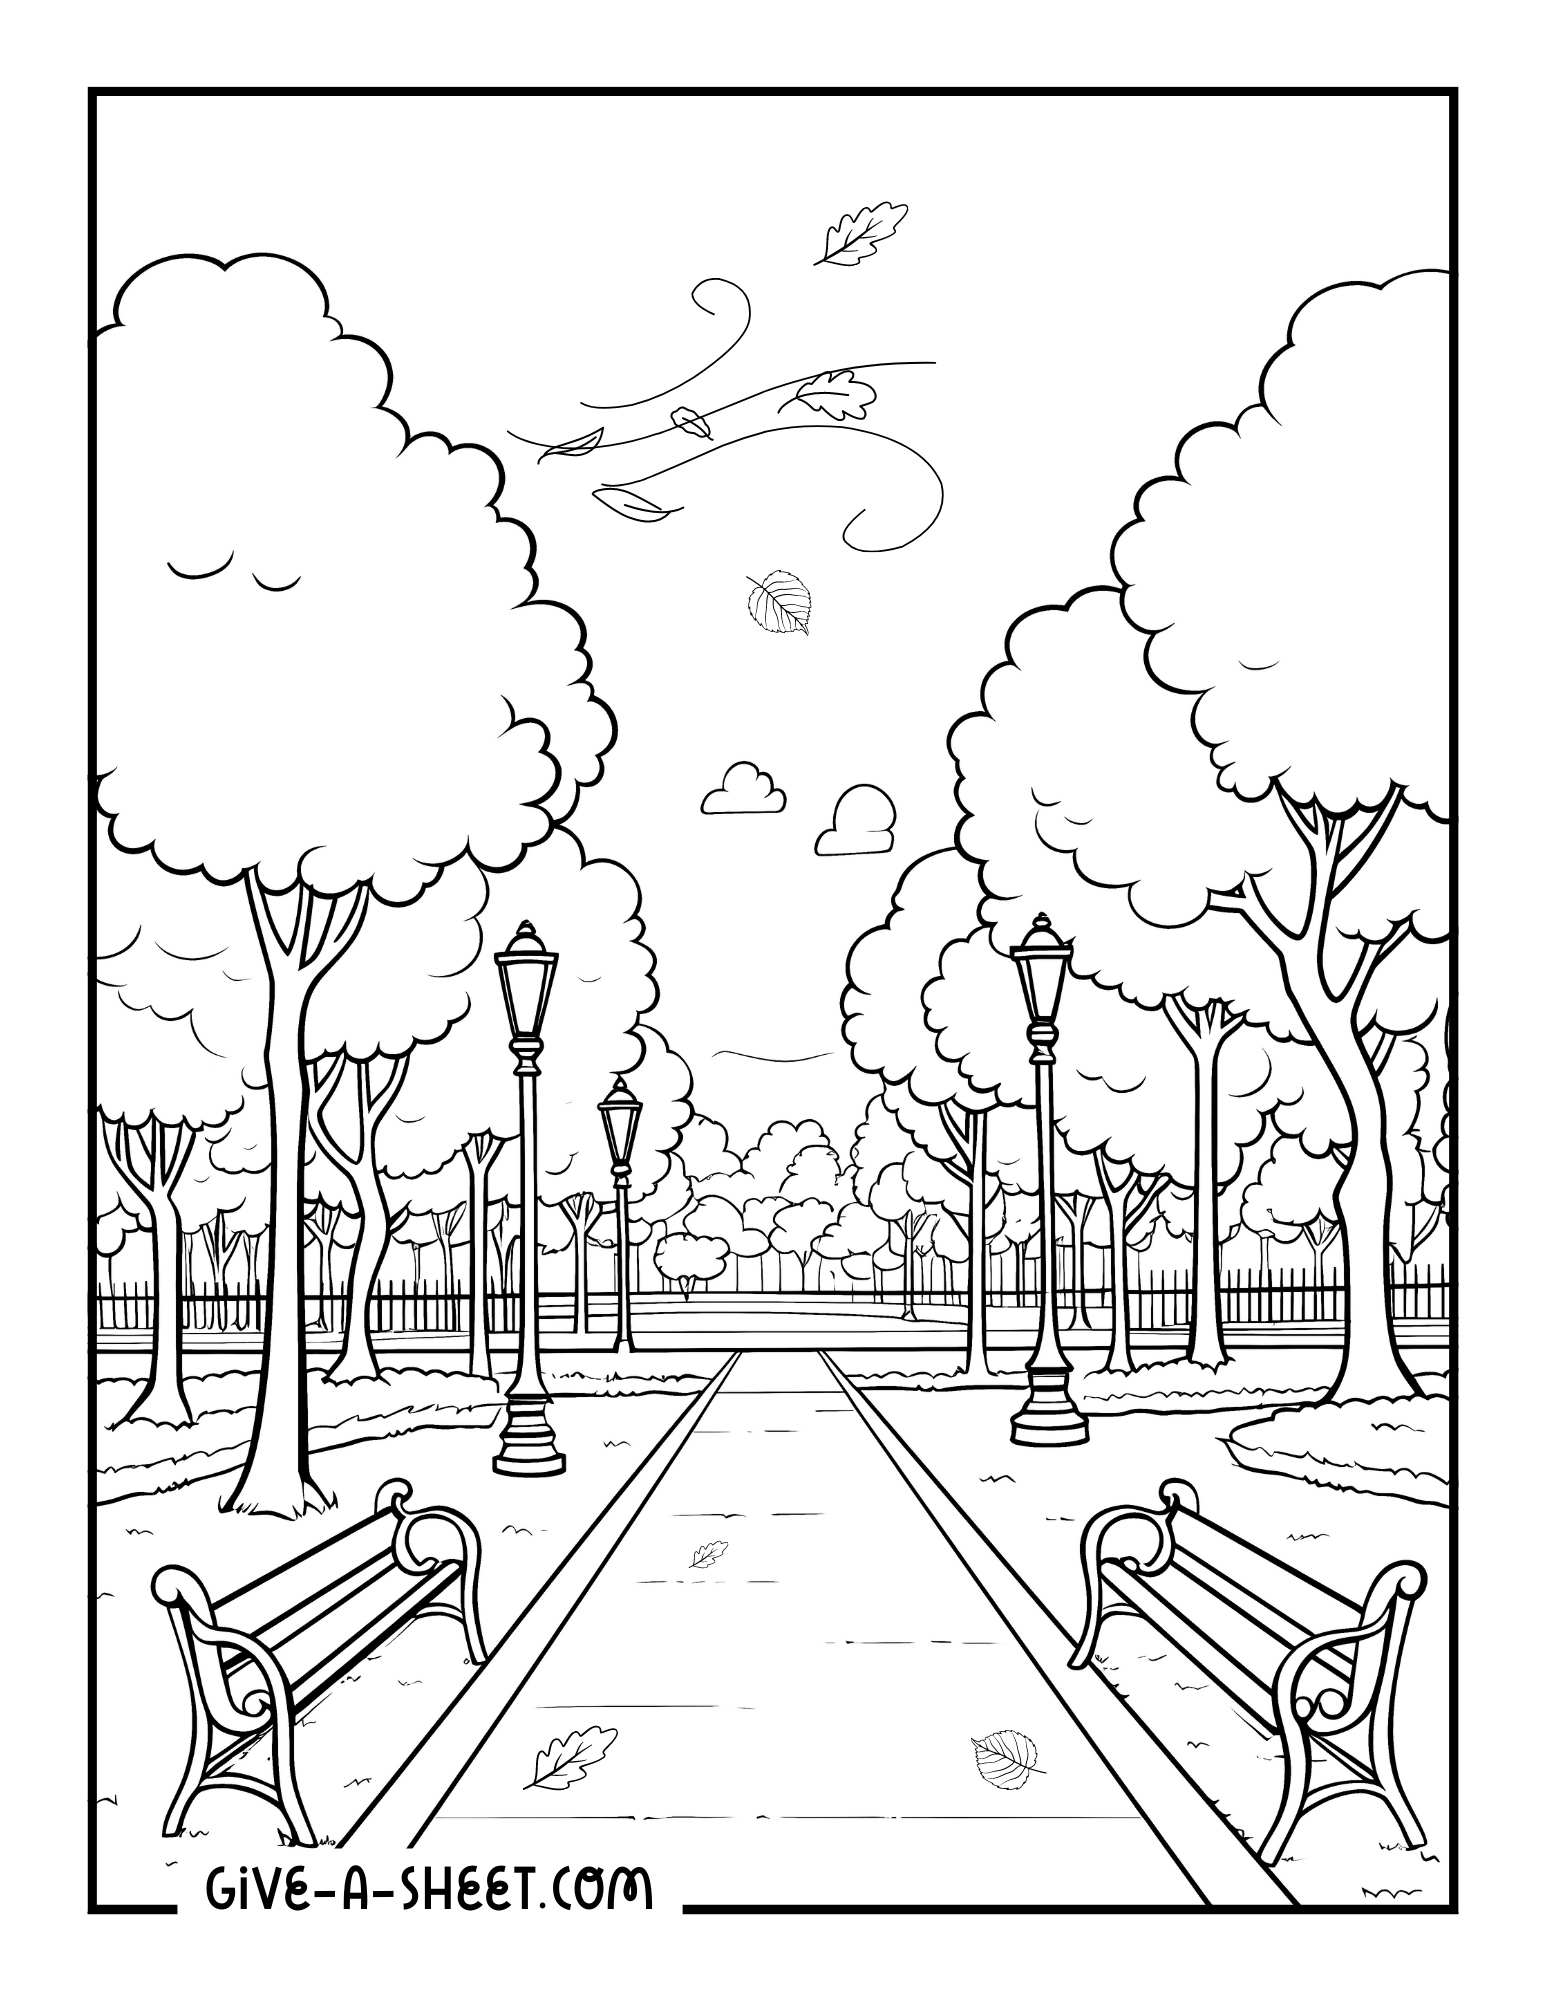 Fall bucket list in the park coloring page.